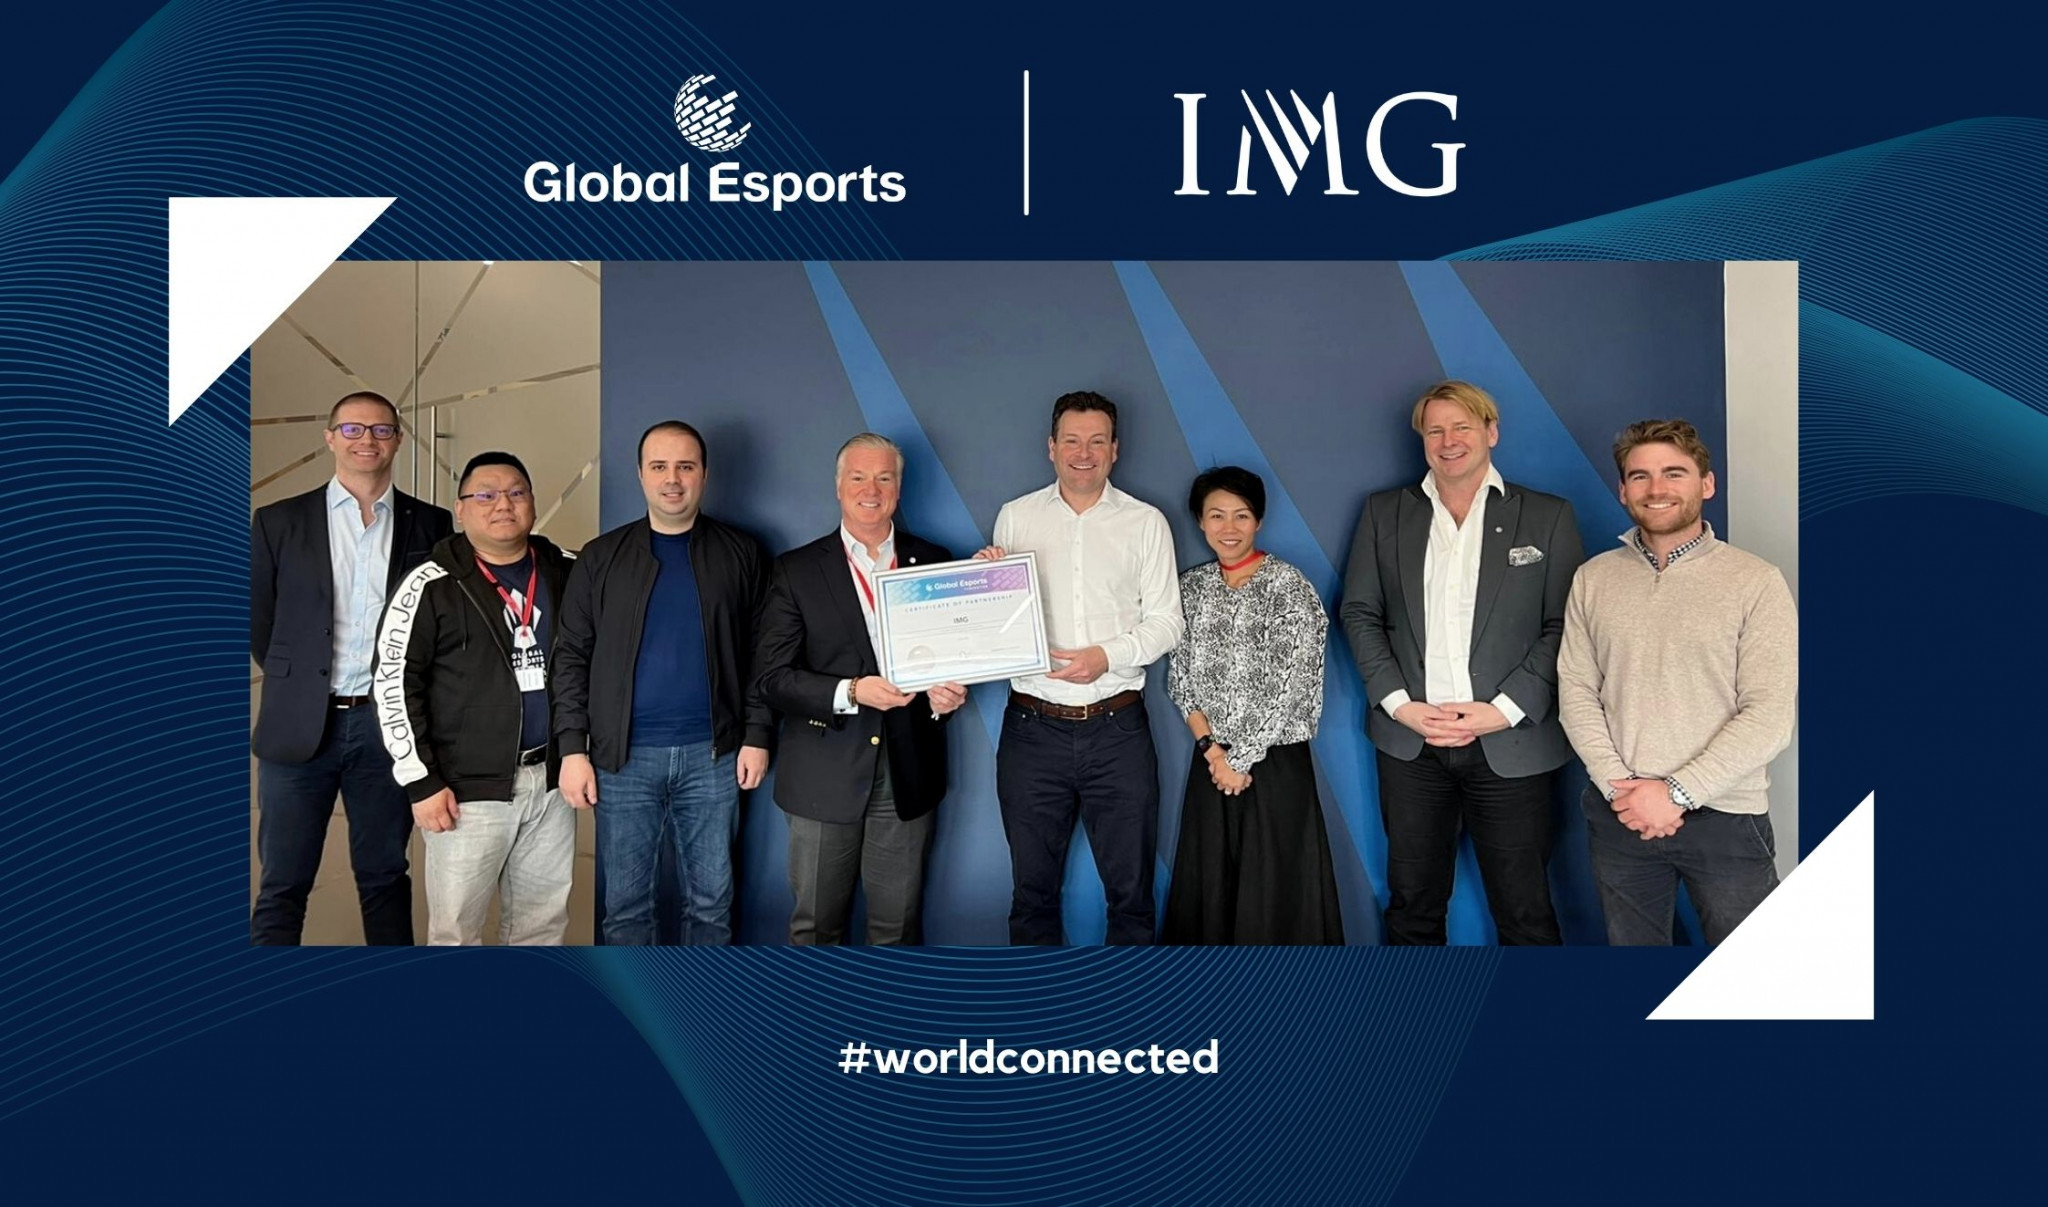 Global Esports Federation enters strategic partnership with IMG for major events